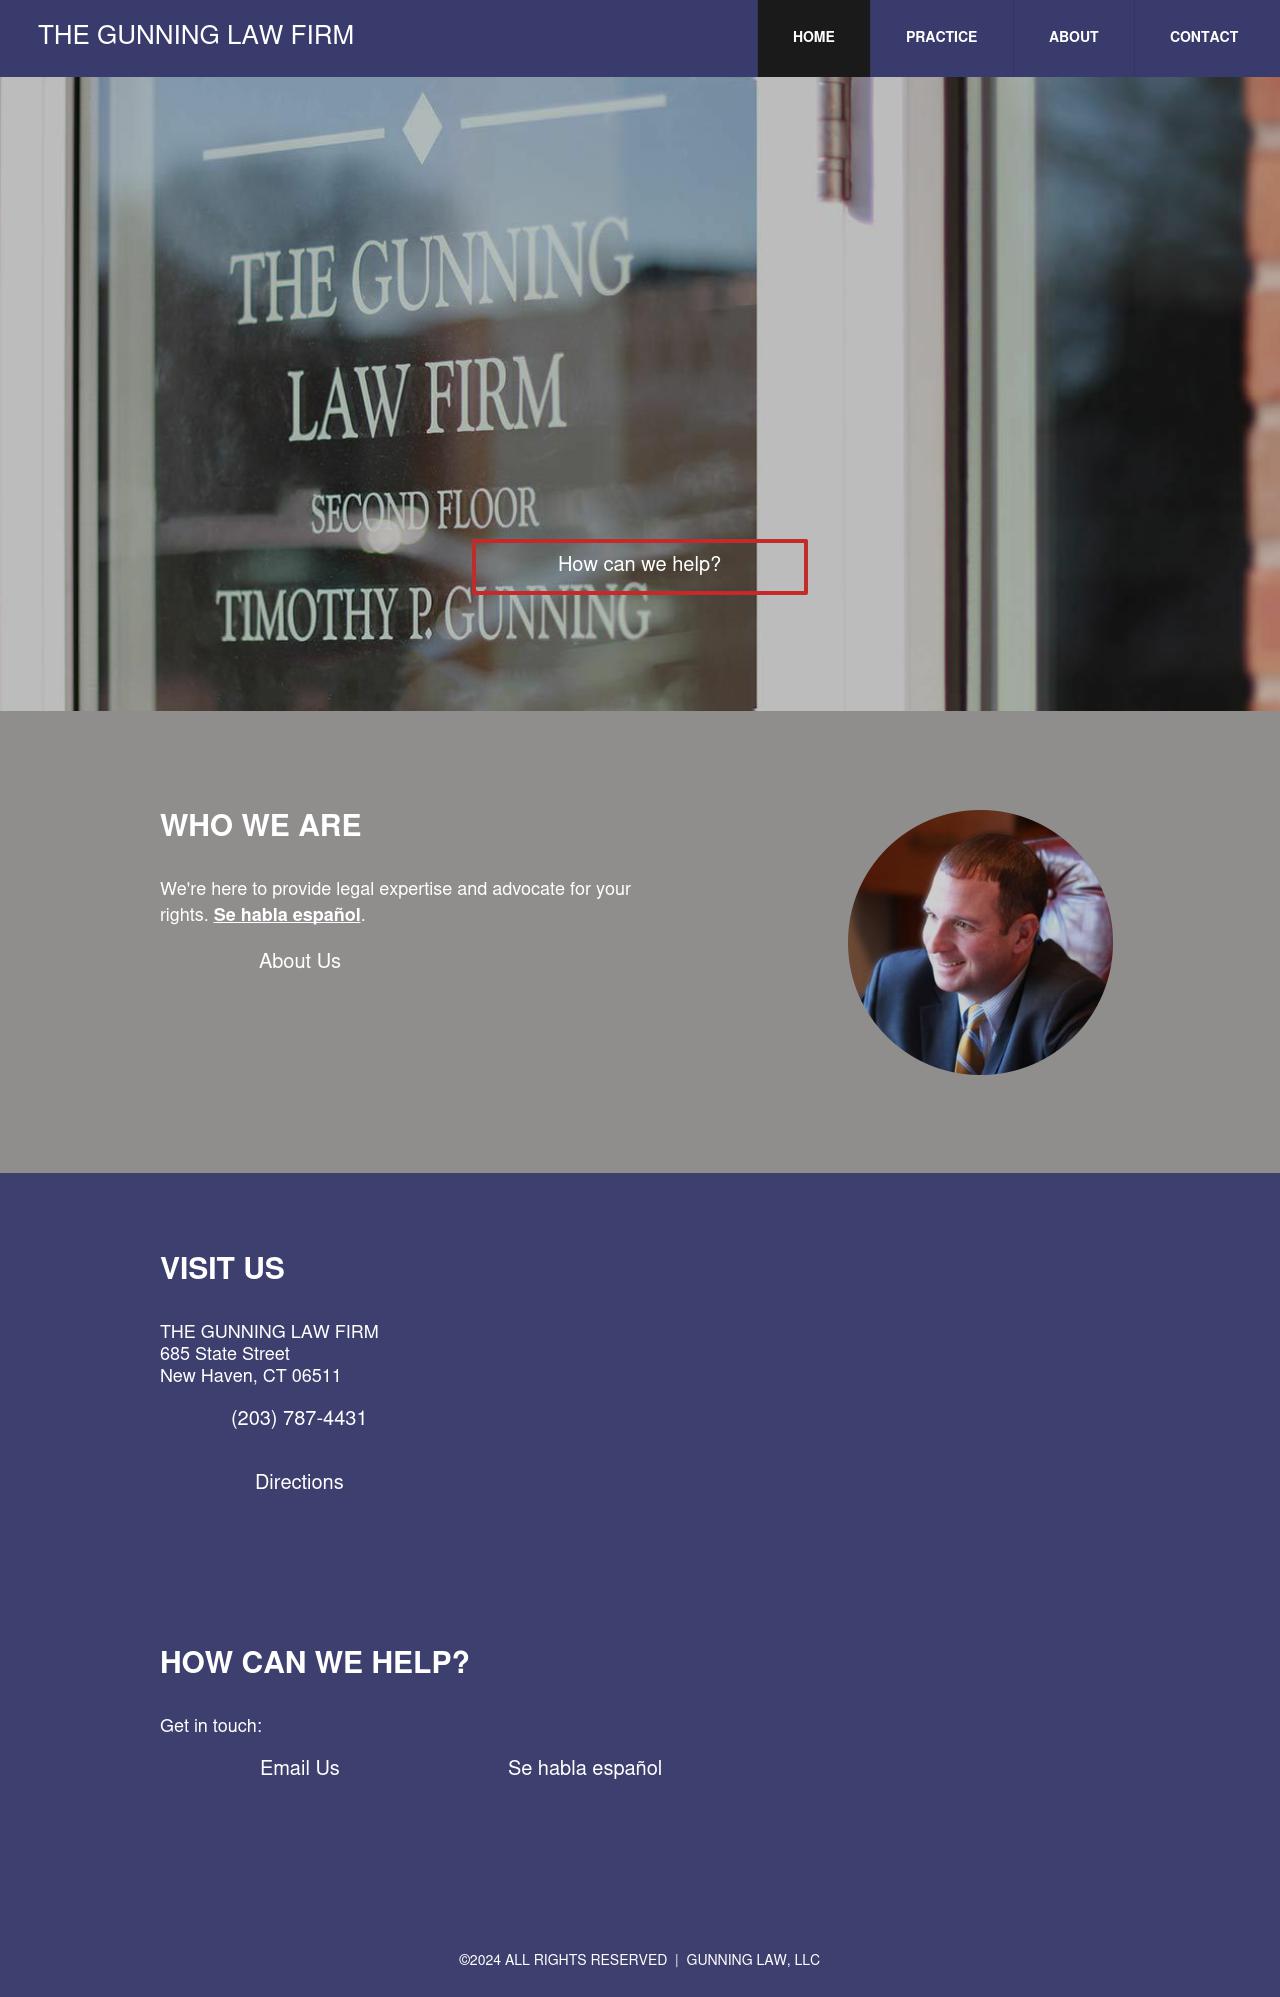 Gunning Law Firm - New Haven CT Lawyers